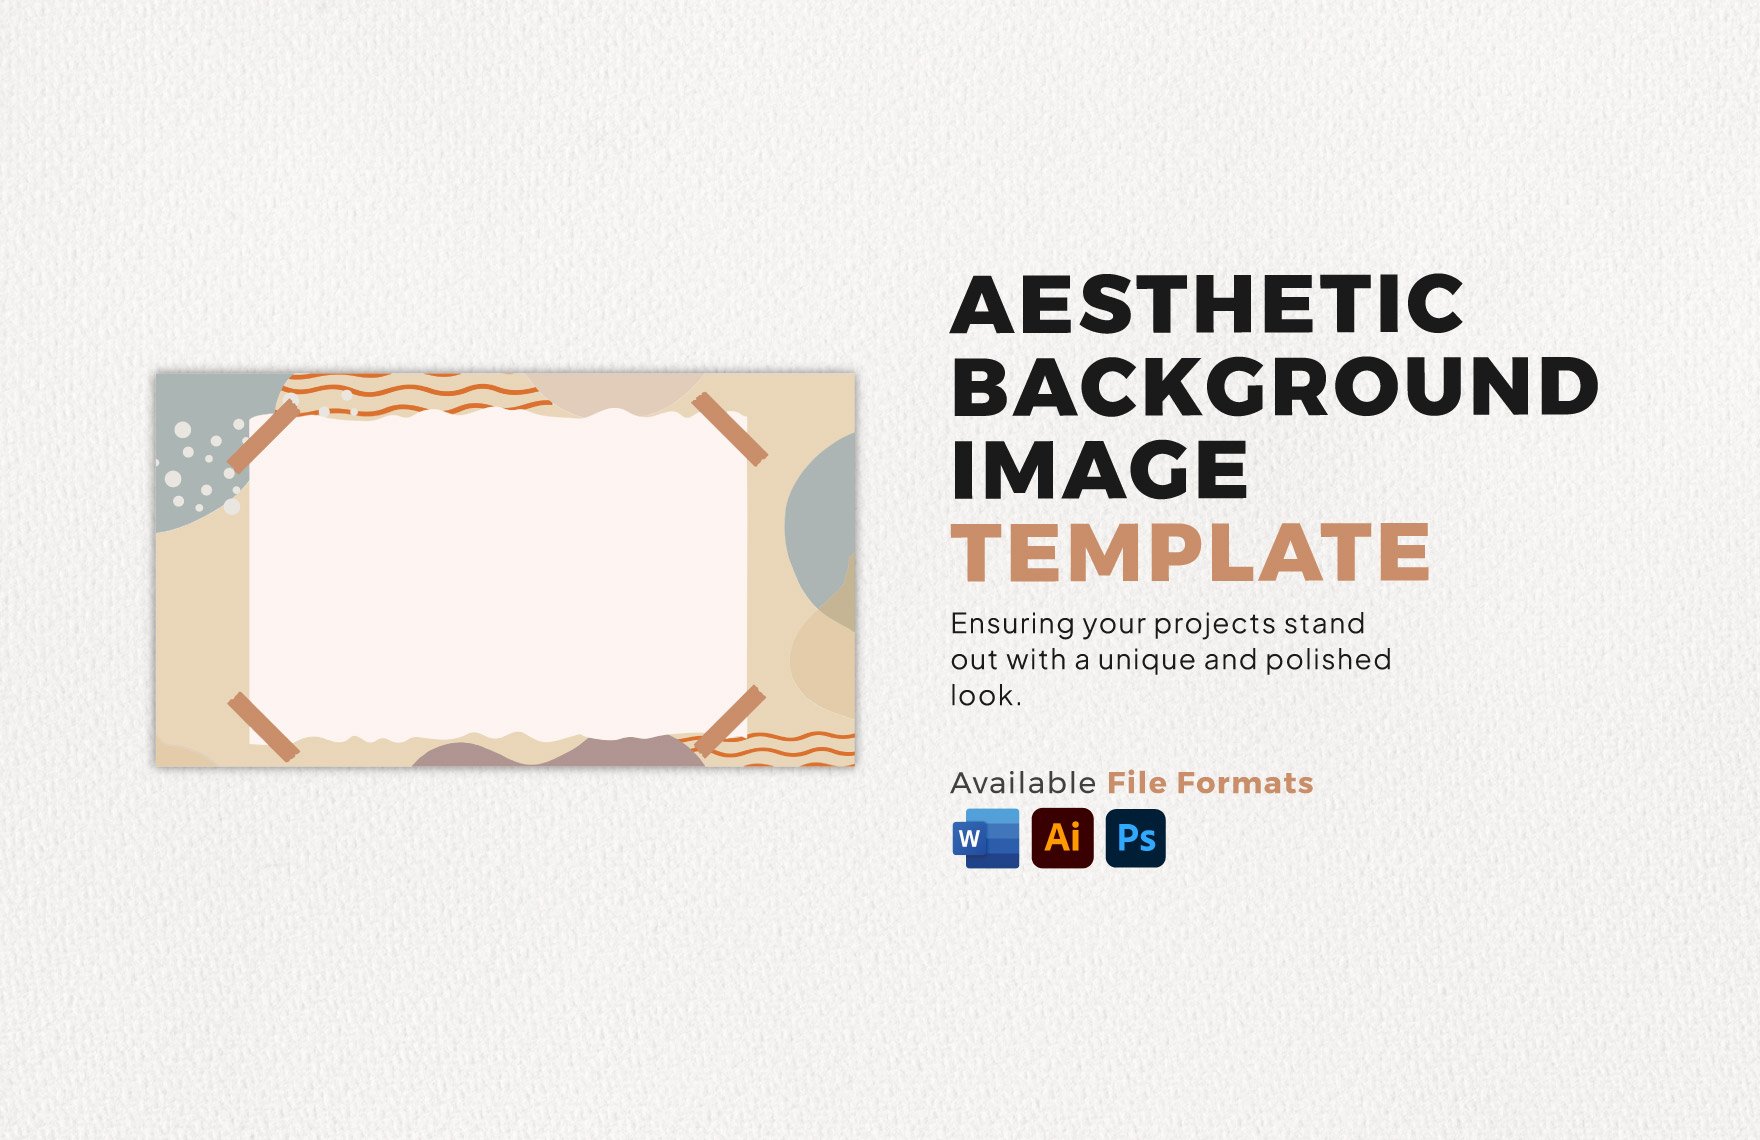 Aesthetic Background Image Template